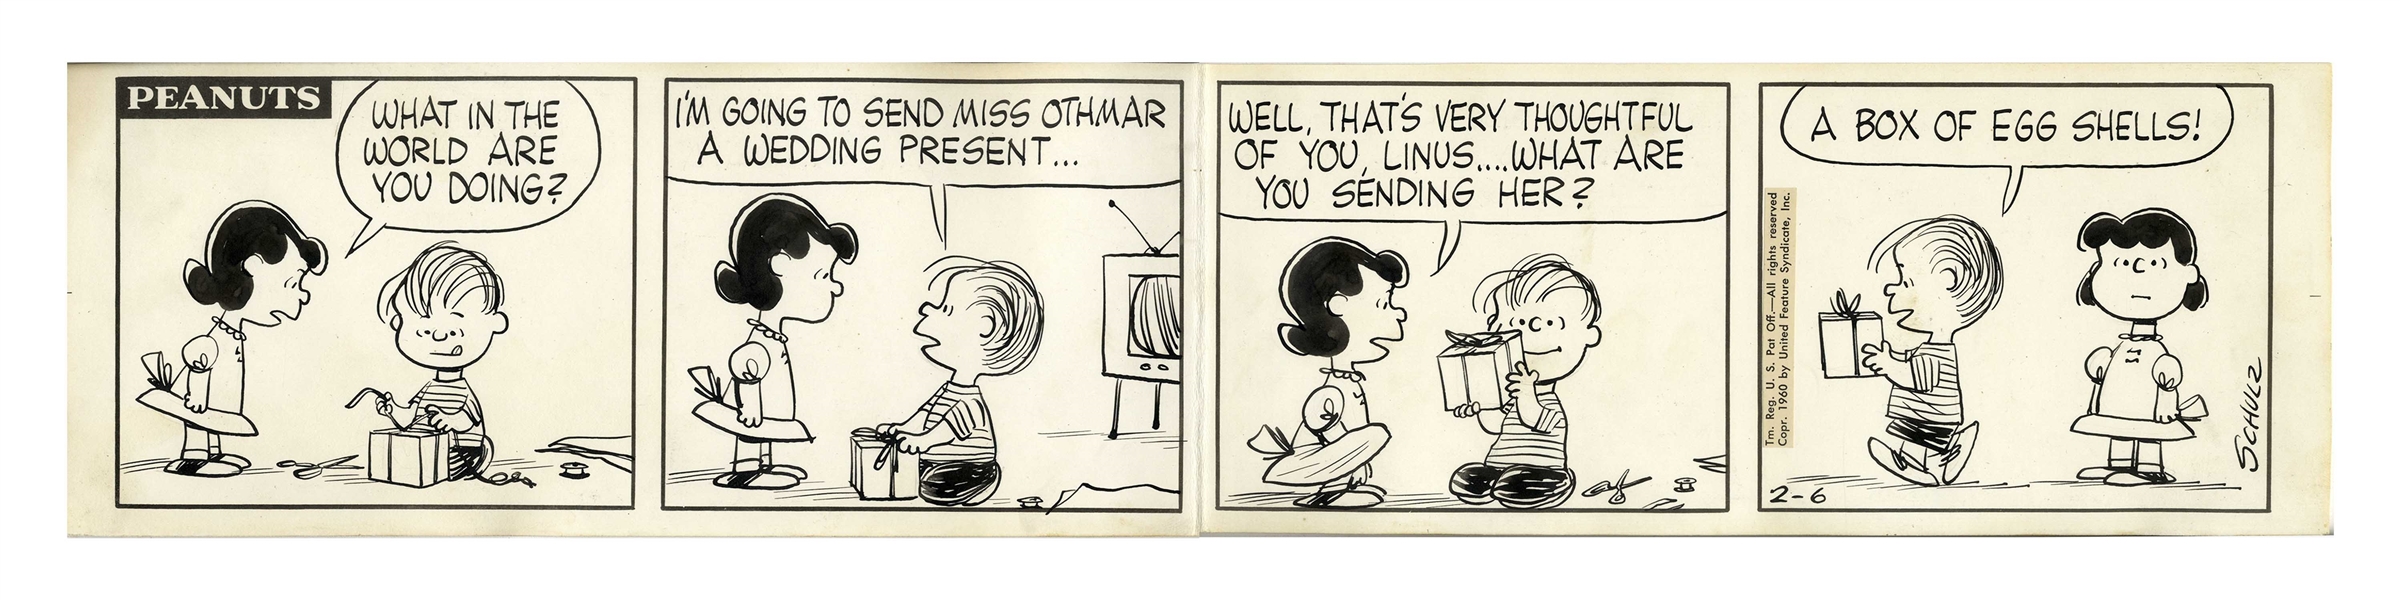 Charles Schulz Hand-Drawn ''Peanuts'' Comic Strip From 1960 -- Linus Gives Miss Othmar Her Wedding Present in This Famous Strip